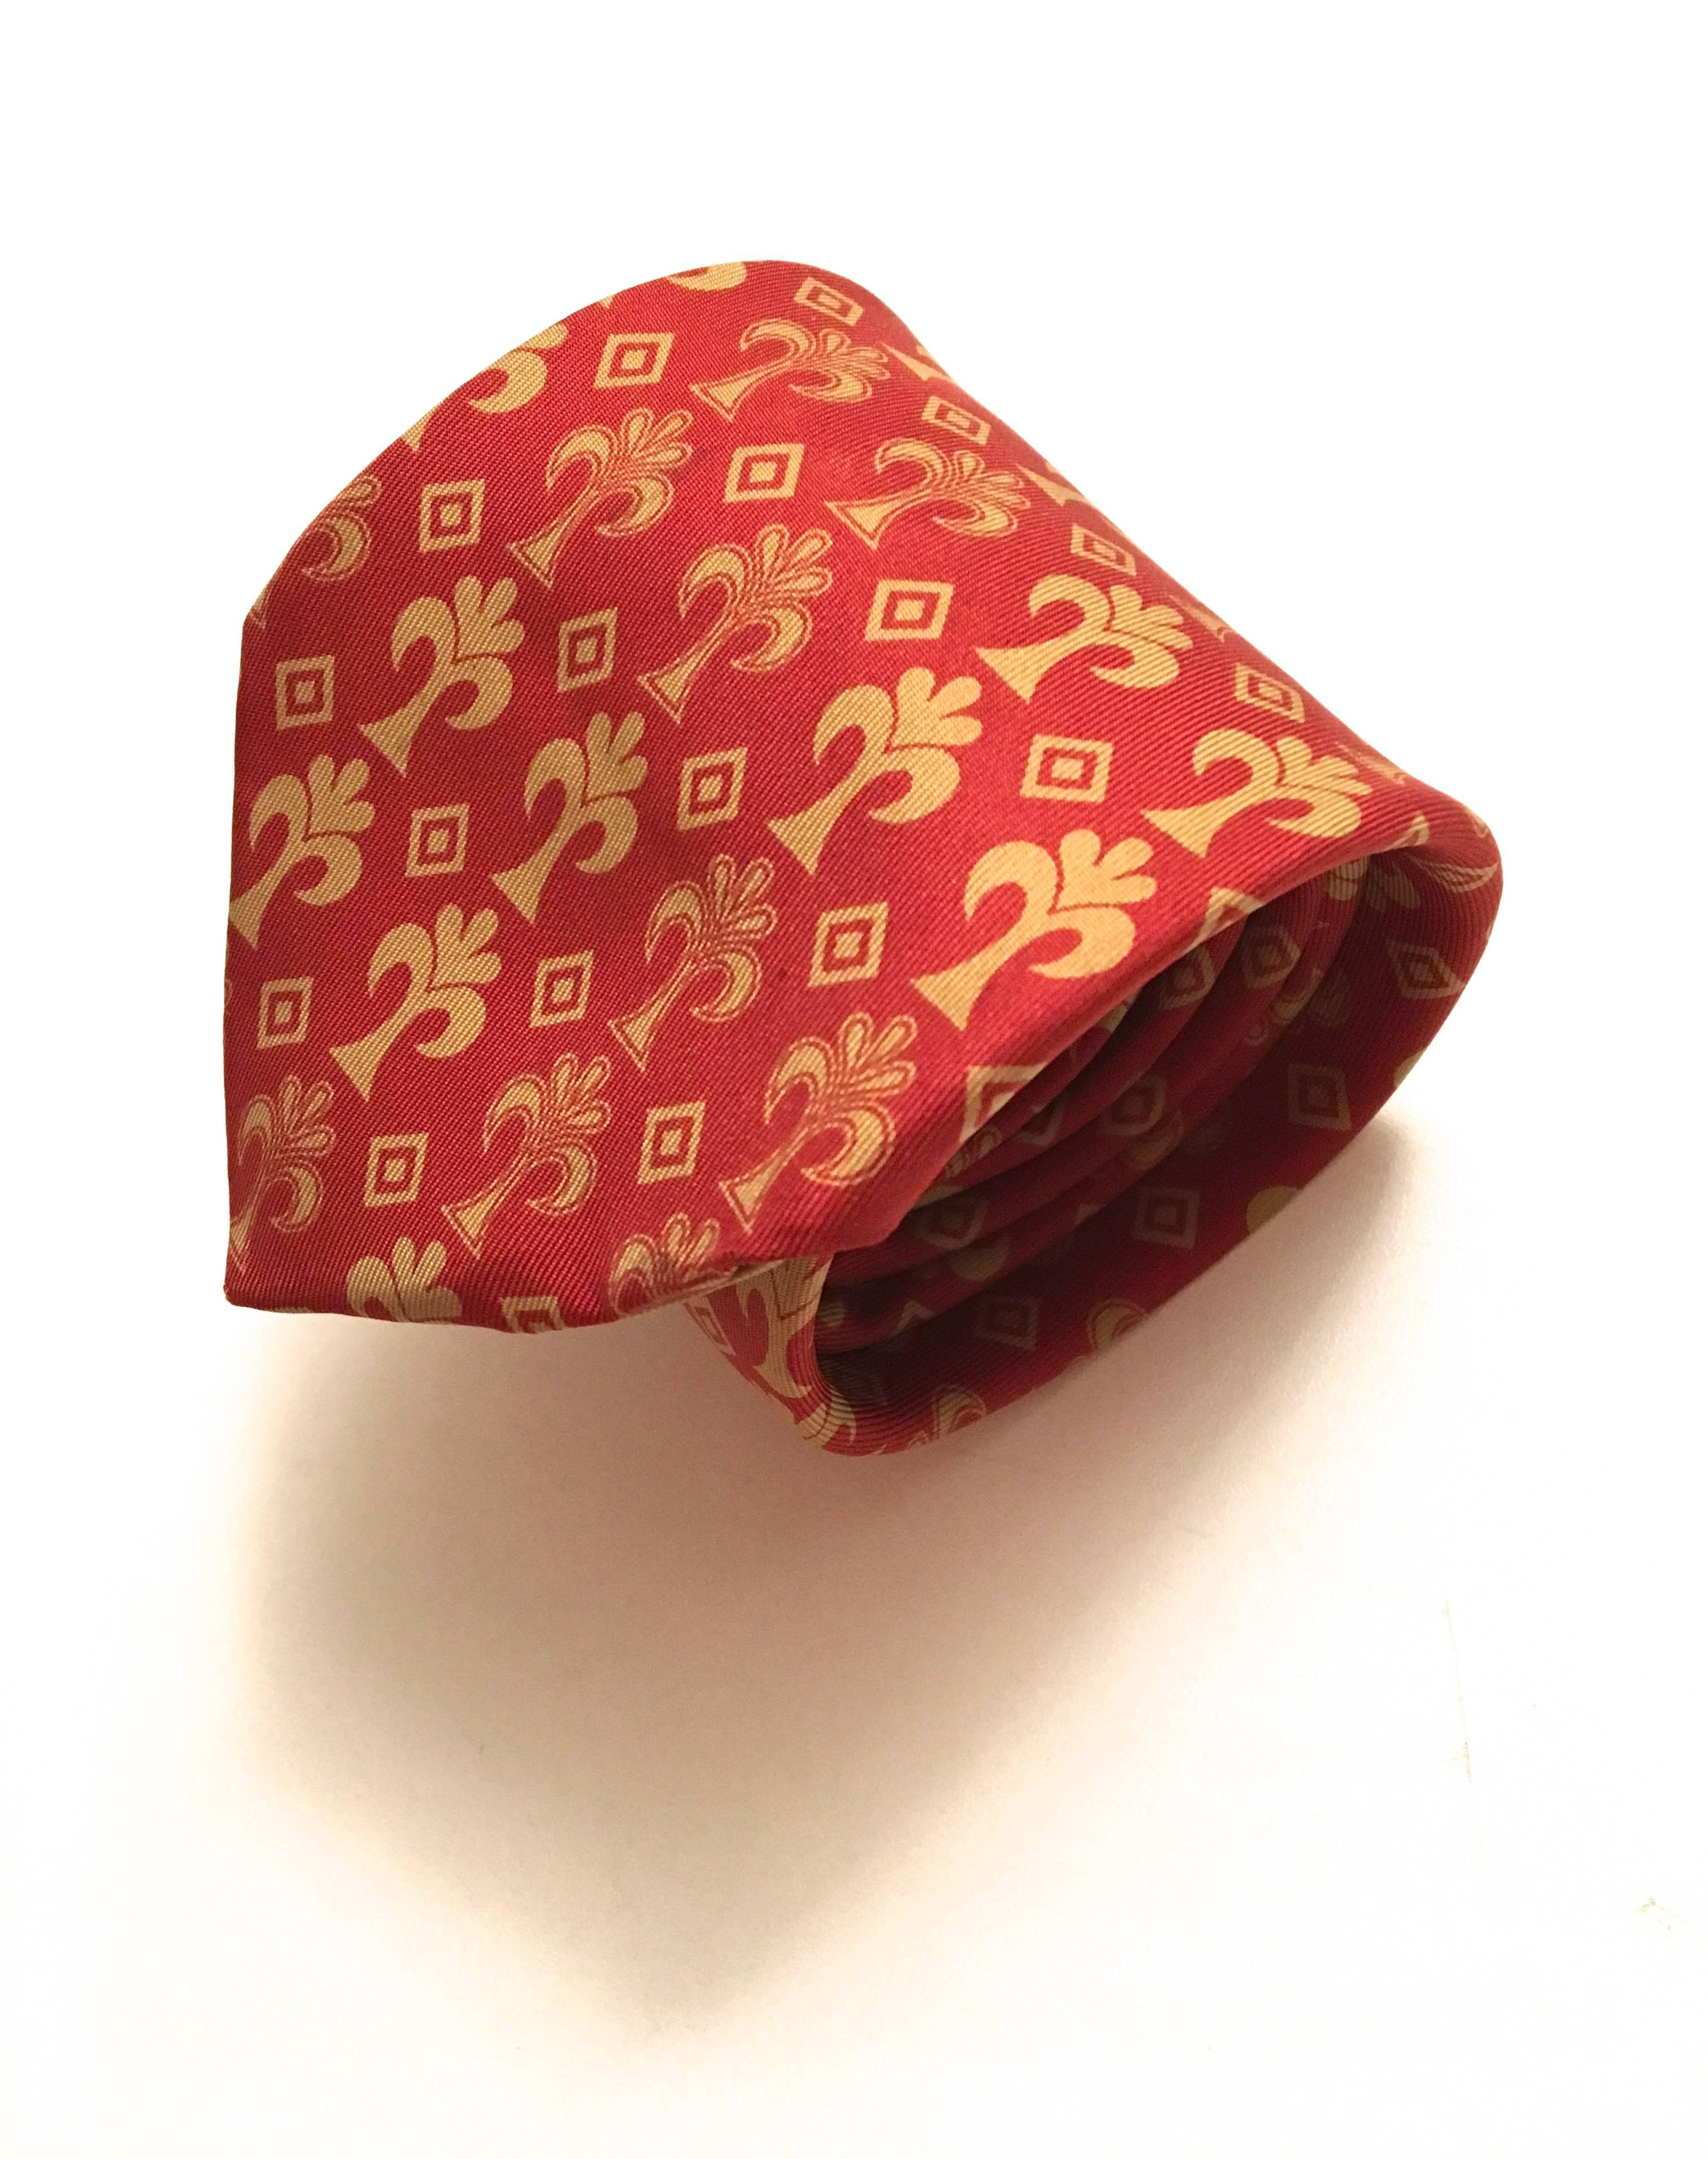 Presented here is a beautiful vintage necktie from Hermes Paris. This beautiful neck tie is a pattern of gold flower-like symbols and squares. The symbols are layered along a solid red background. The tie measures 57 inches. At its wide point, the